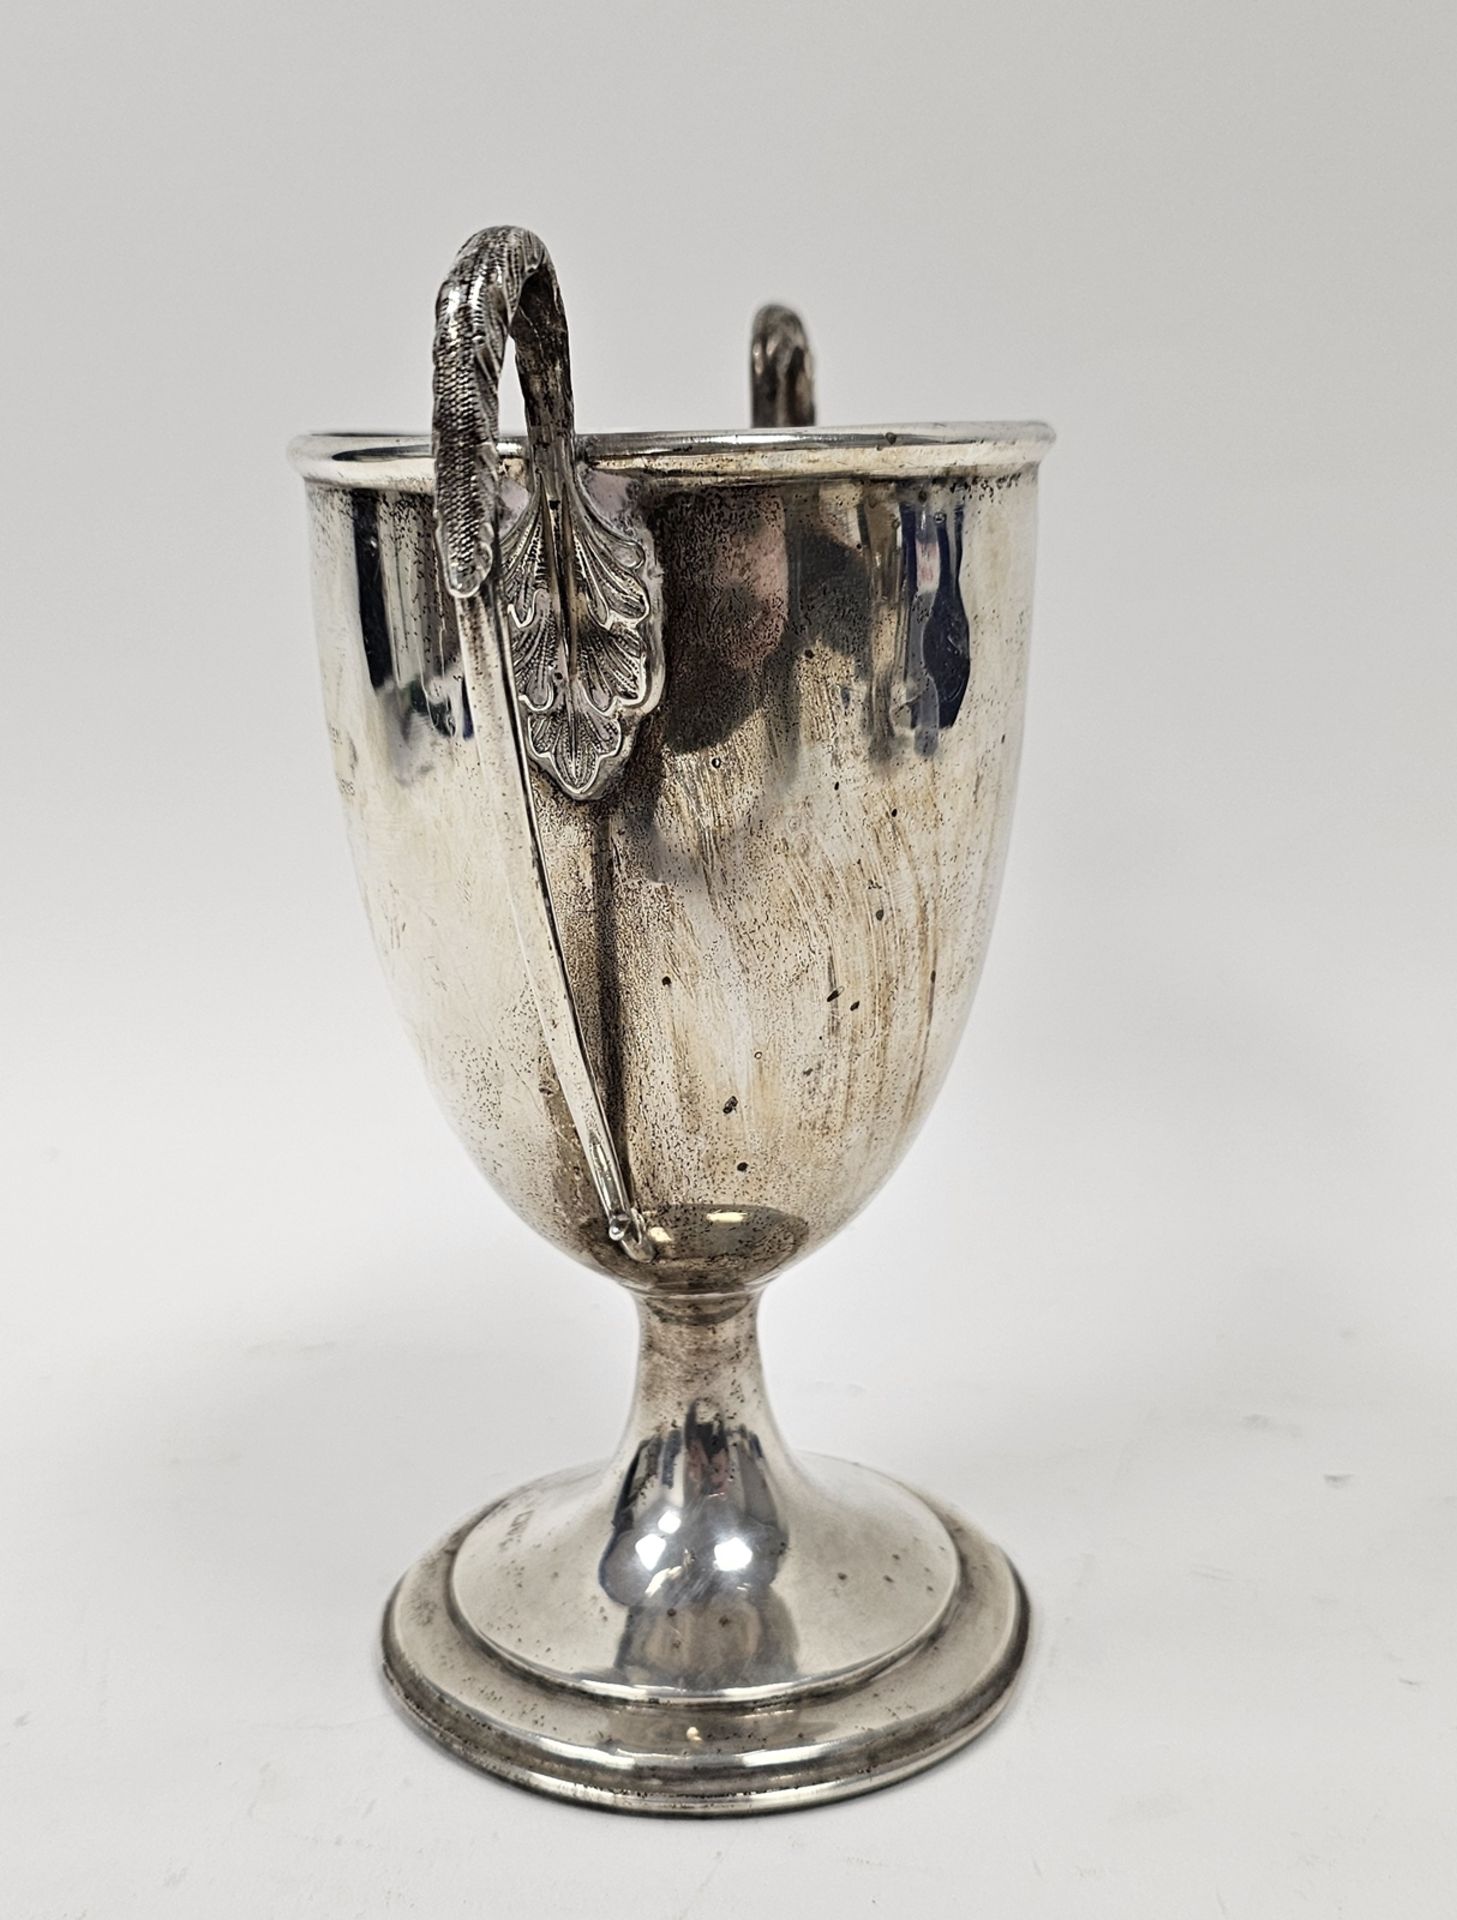 Edwardian silver two-handled trophy, Chester, early 20th century (marks rubbed), of goblet form with - Image 2 of 3